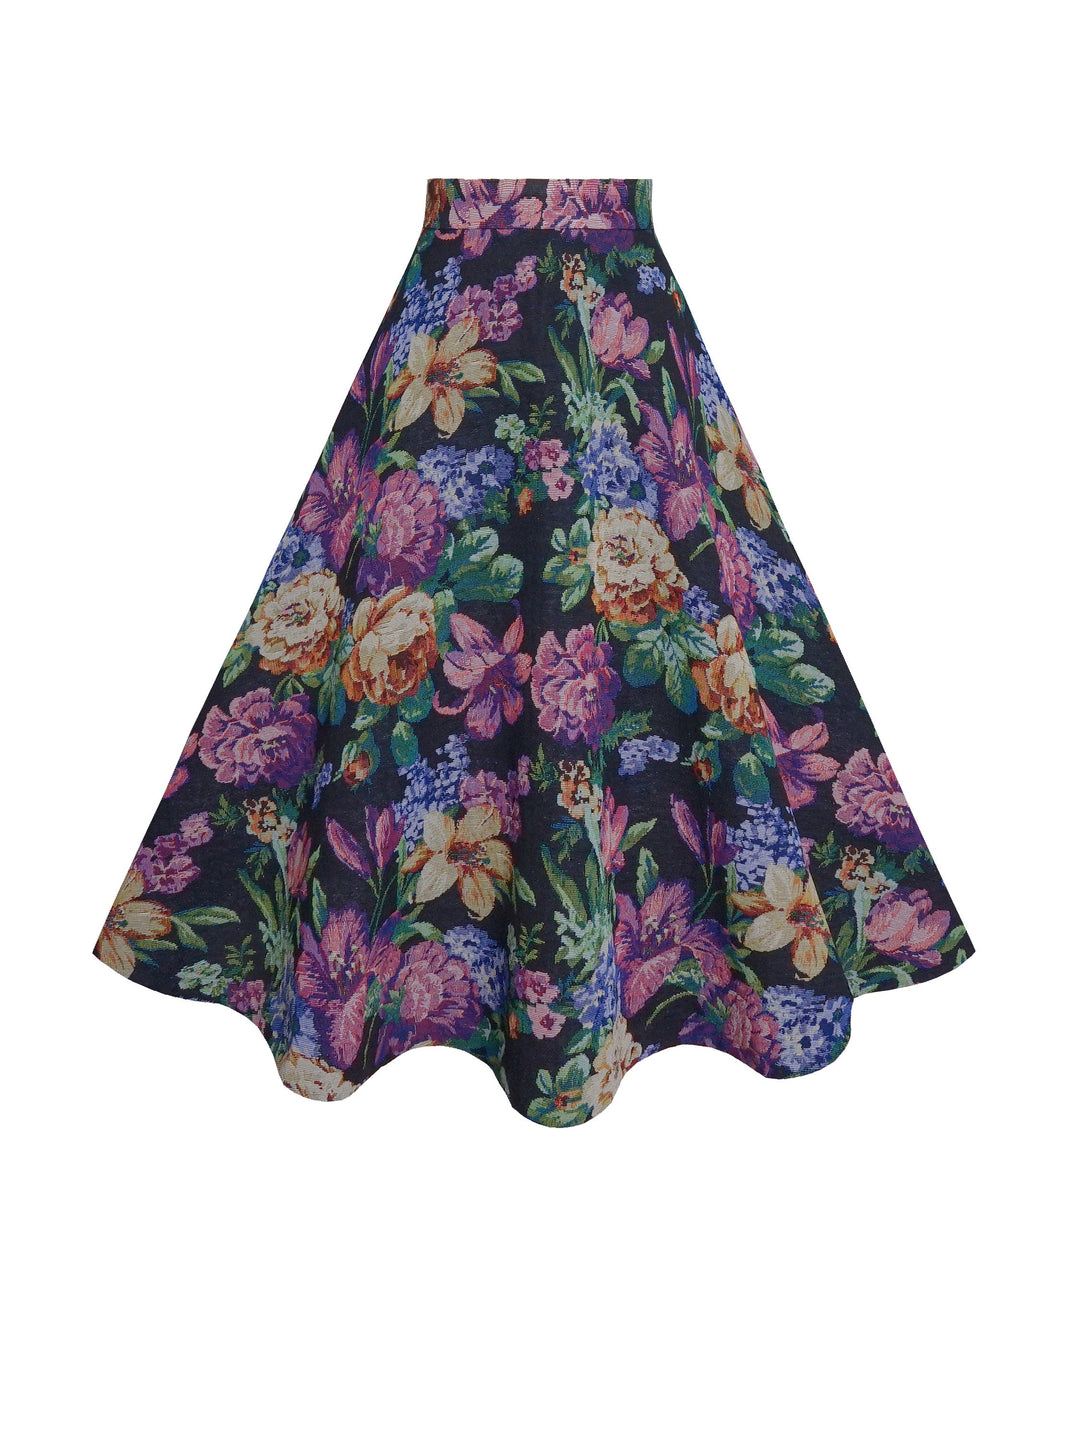 RTS - Size S - Lilian Skirt Tapestry "Floral Rhapsody"